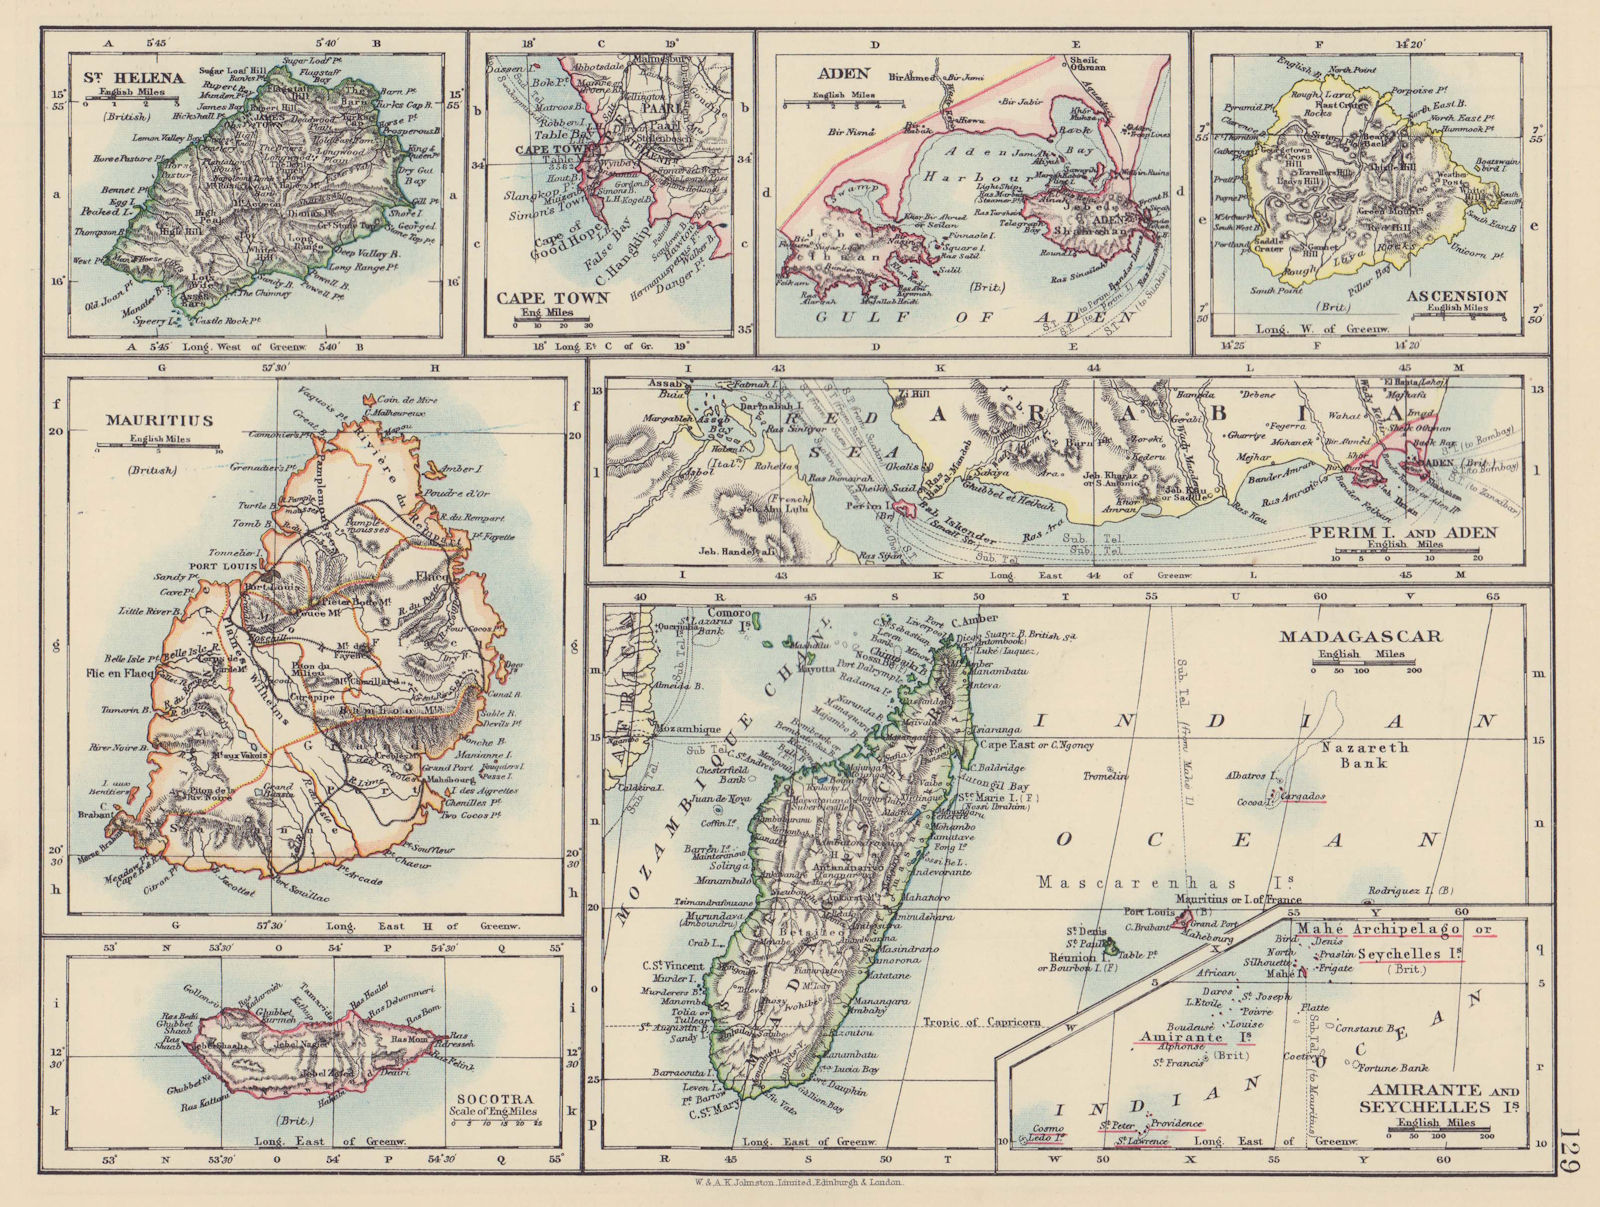 AFRICAN ISLANDS & CITIES. Madagascar Mauritius Ascension St Helena 1901 map